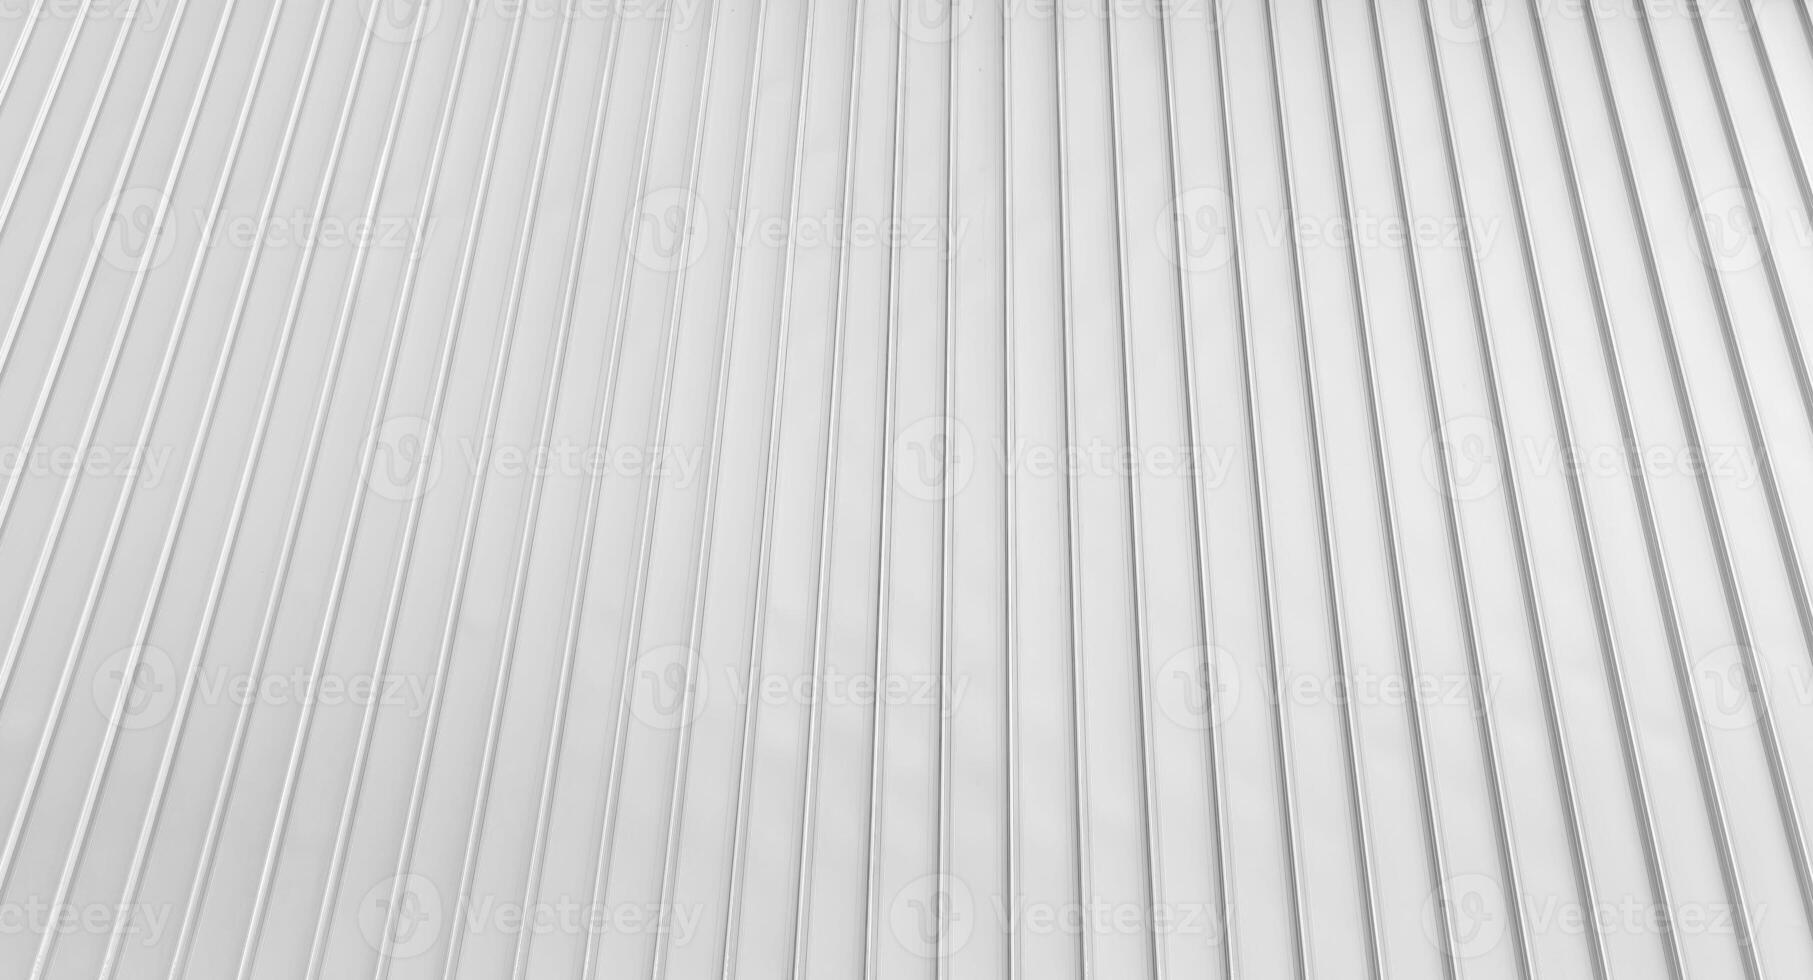 The texture of the cladding of the building from metal aluminum panels. Abstract background. photo